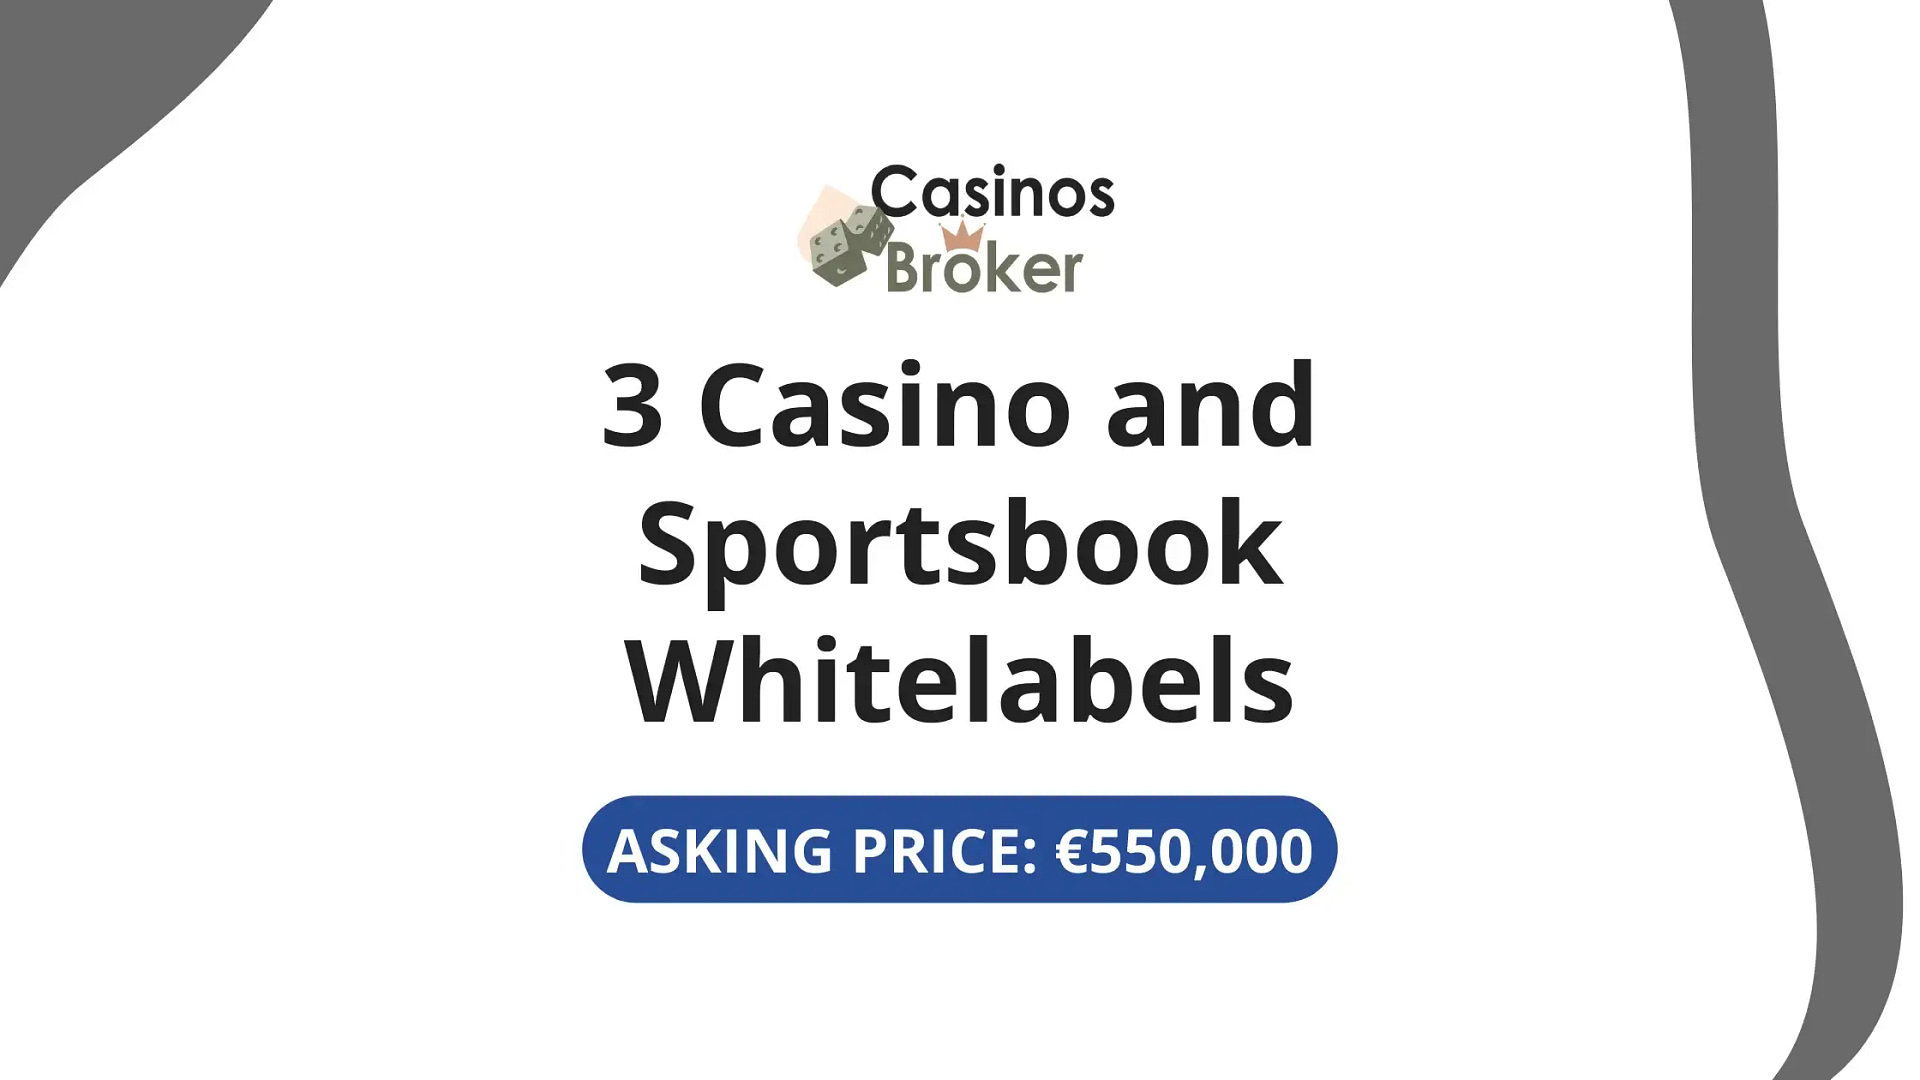 3 Casino and Sportsbook Whitelabels - Asking price €550,000